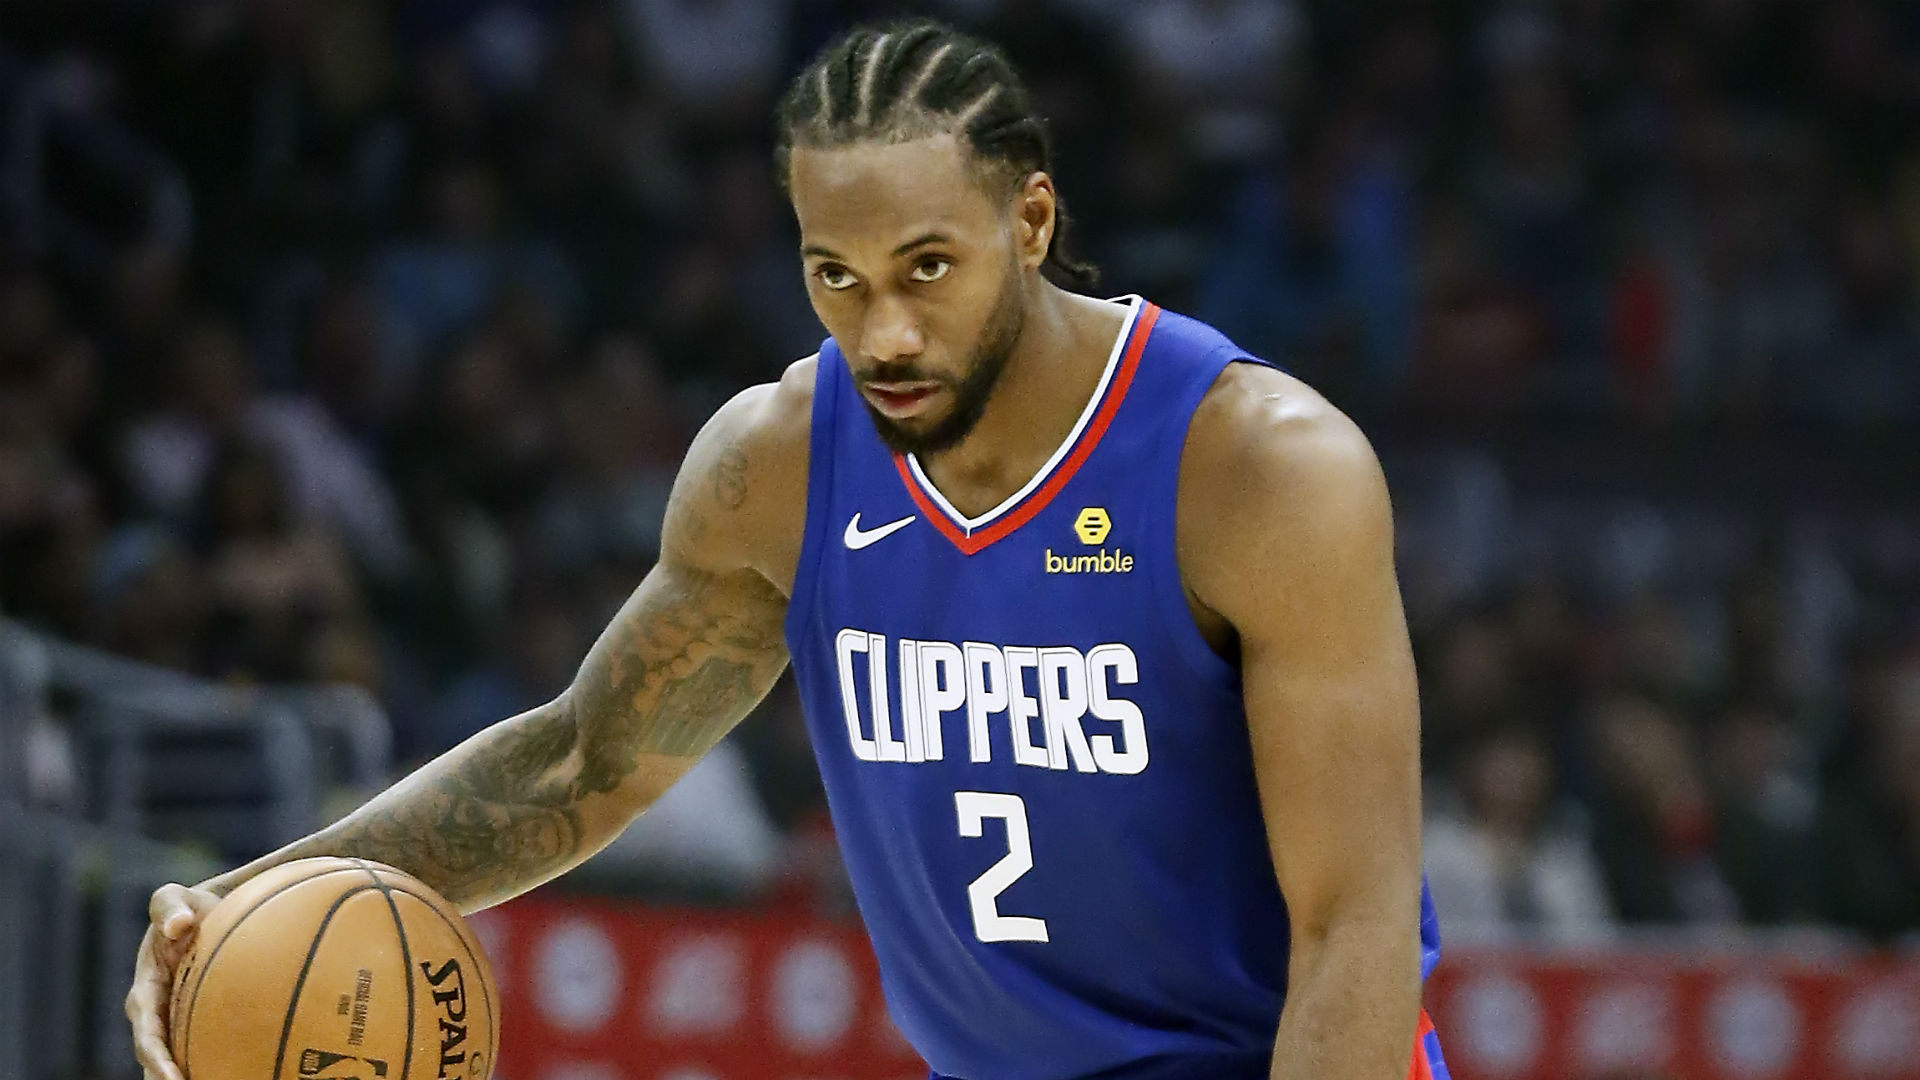 NBA Trades: This Clippers' Kawhi Leonard Trade Proposal to Pelicans Could Shake up The League!